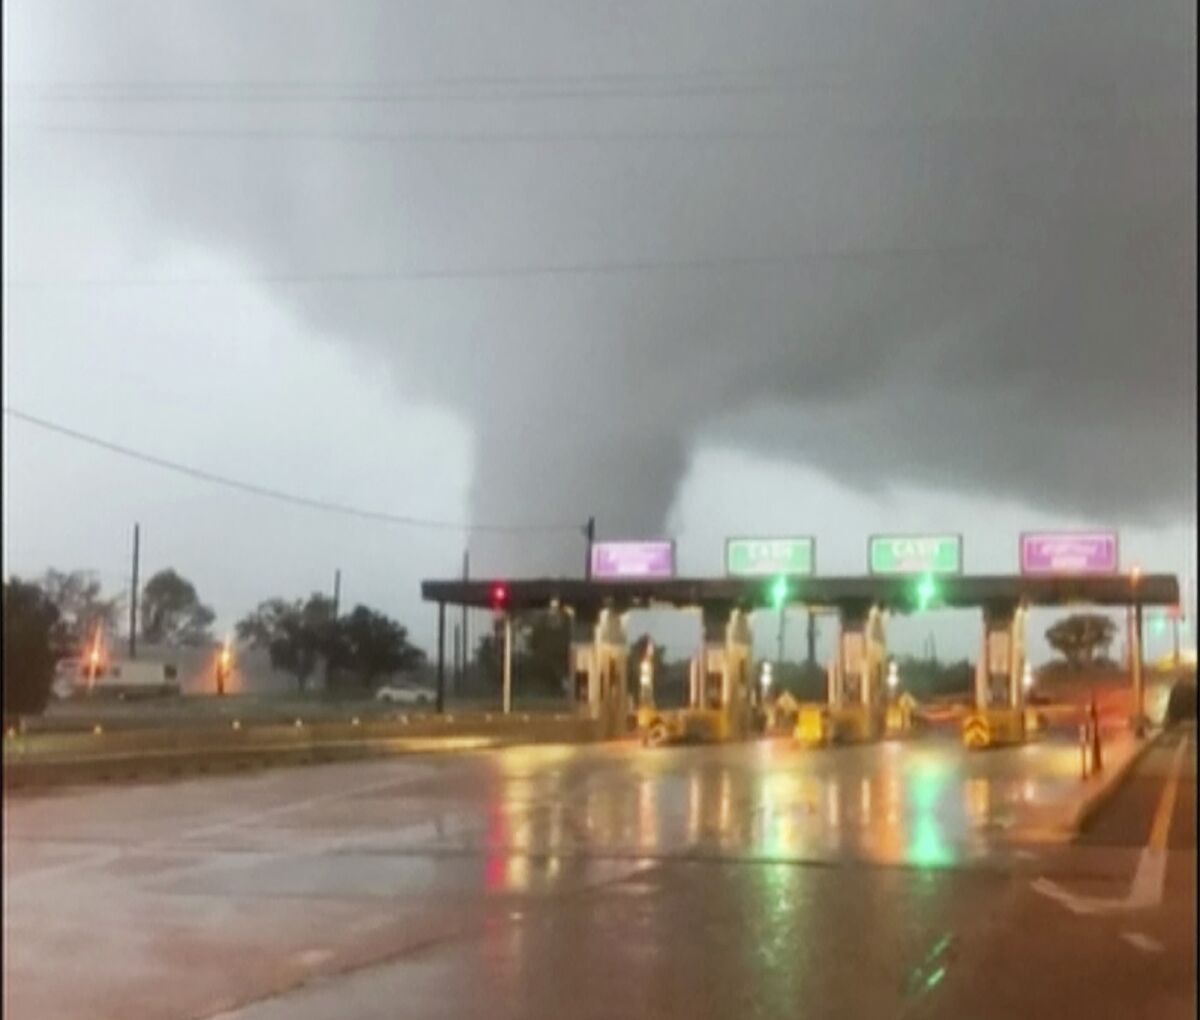 The funnel of a large tornado is seen behind a roadway slick with rain.